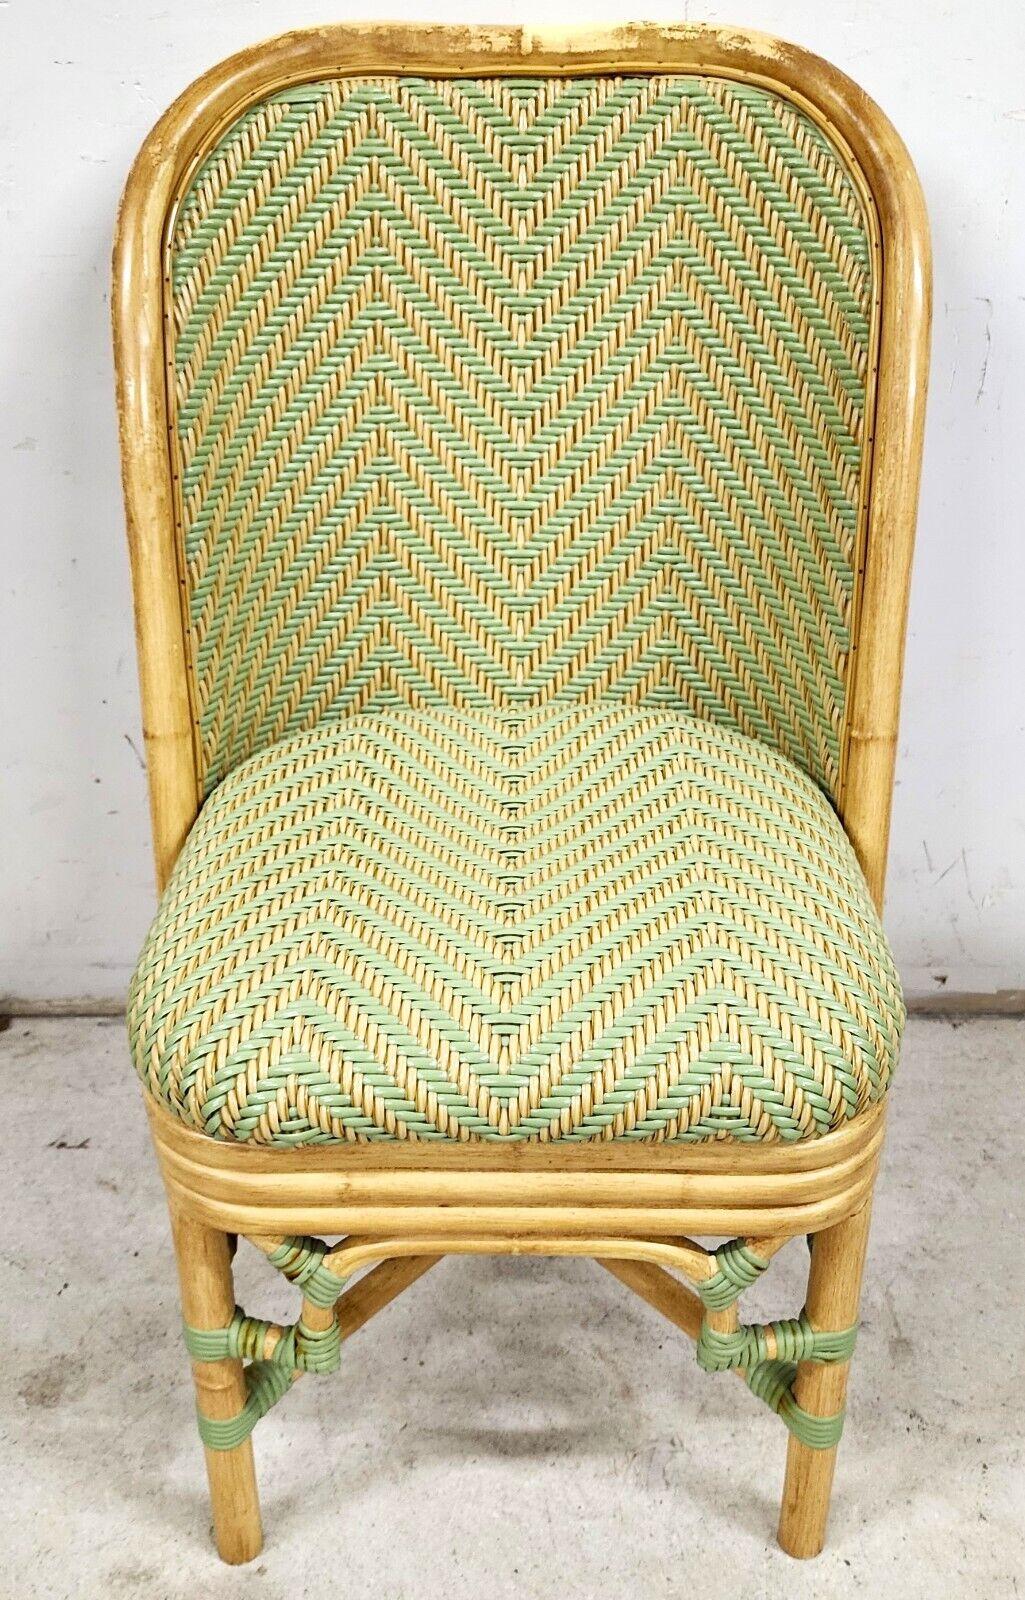 For FULL item description click on CONTINUE READING at the bottom of this page.

Offering One Of Our Recent Palm Beach Estate Fine Furniture Acquisitions Of 
A PE Rattan Wicker + Faux Bamboo Aluminum Outdoor Dining Chairs by LANE VENTURE FINE